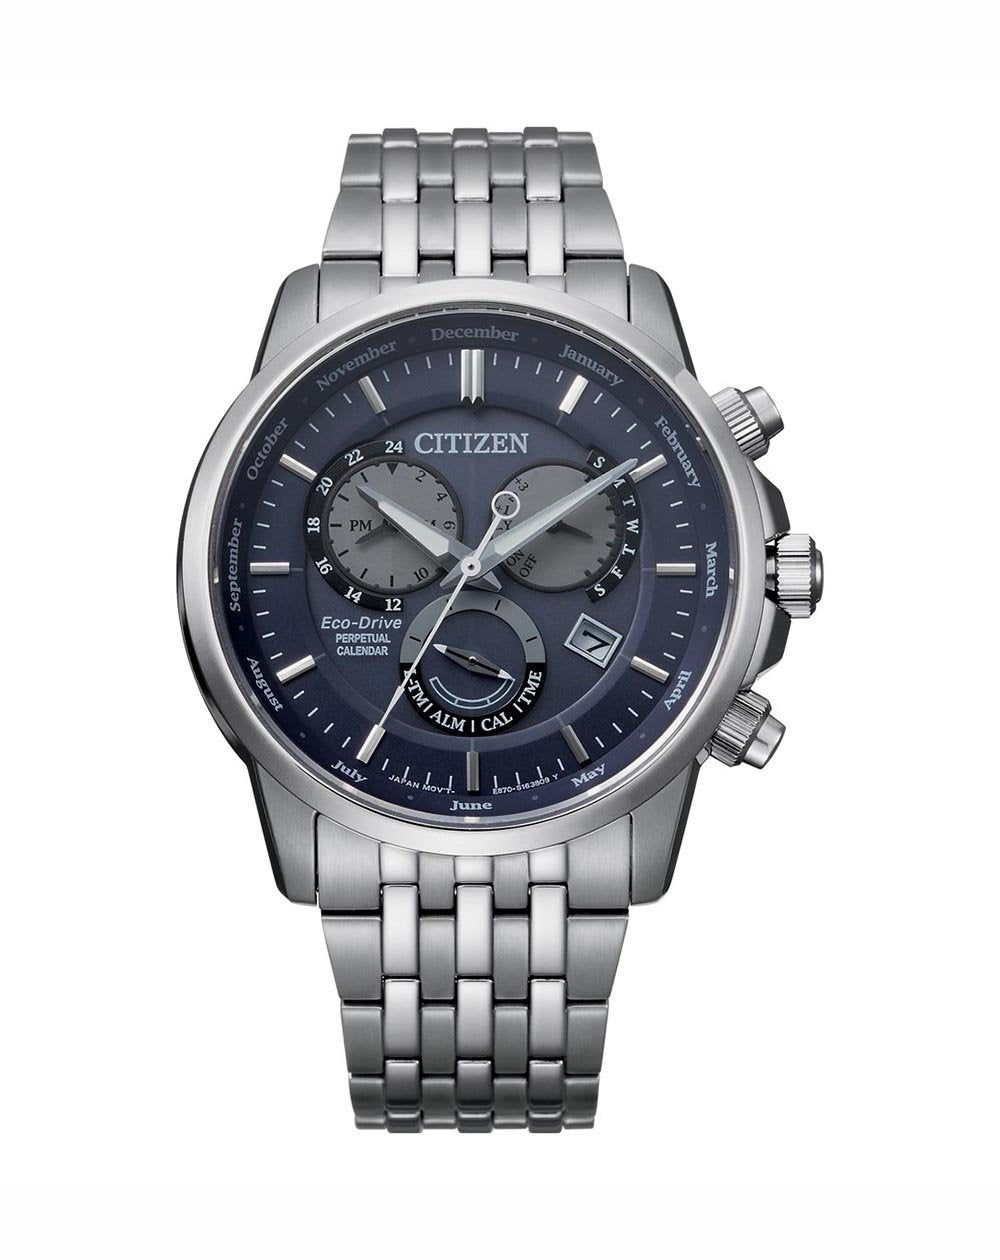 Citizen Eco Drive Gents Stainless Steel Case and Strap Perpetual Calendar Alarm Watch #21411